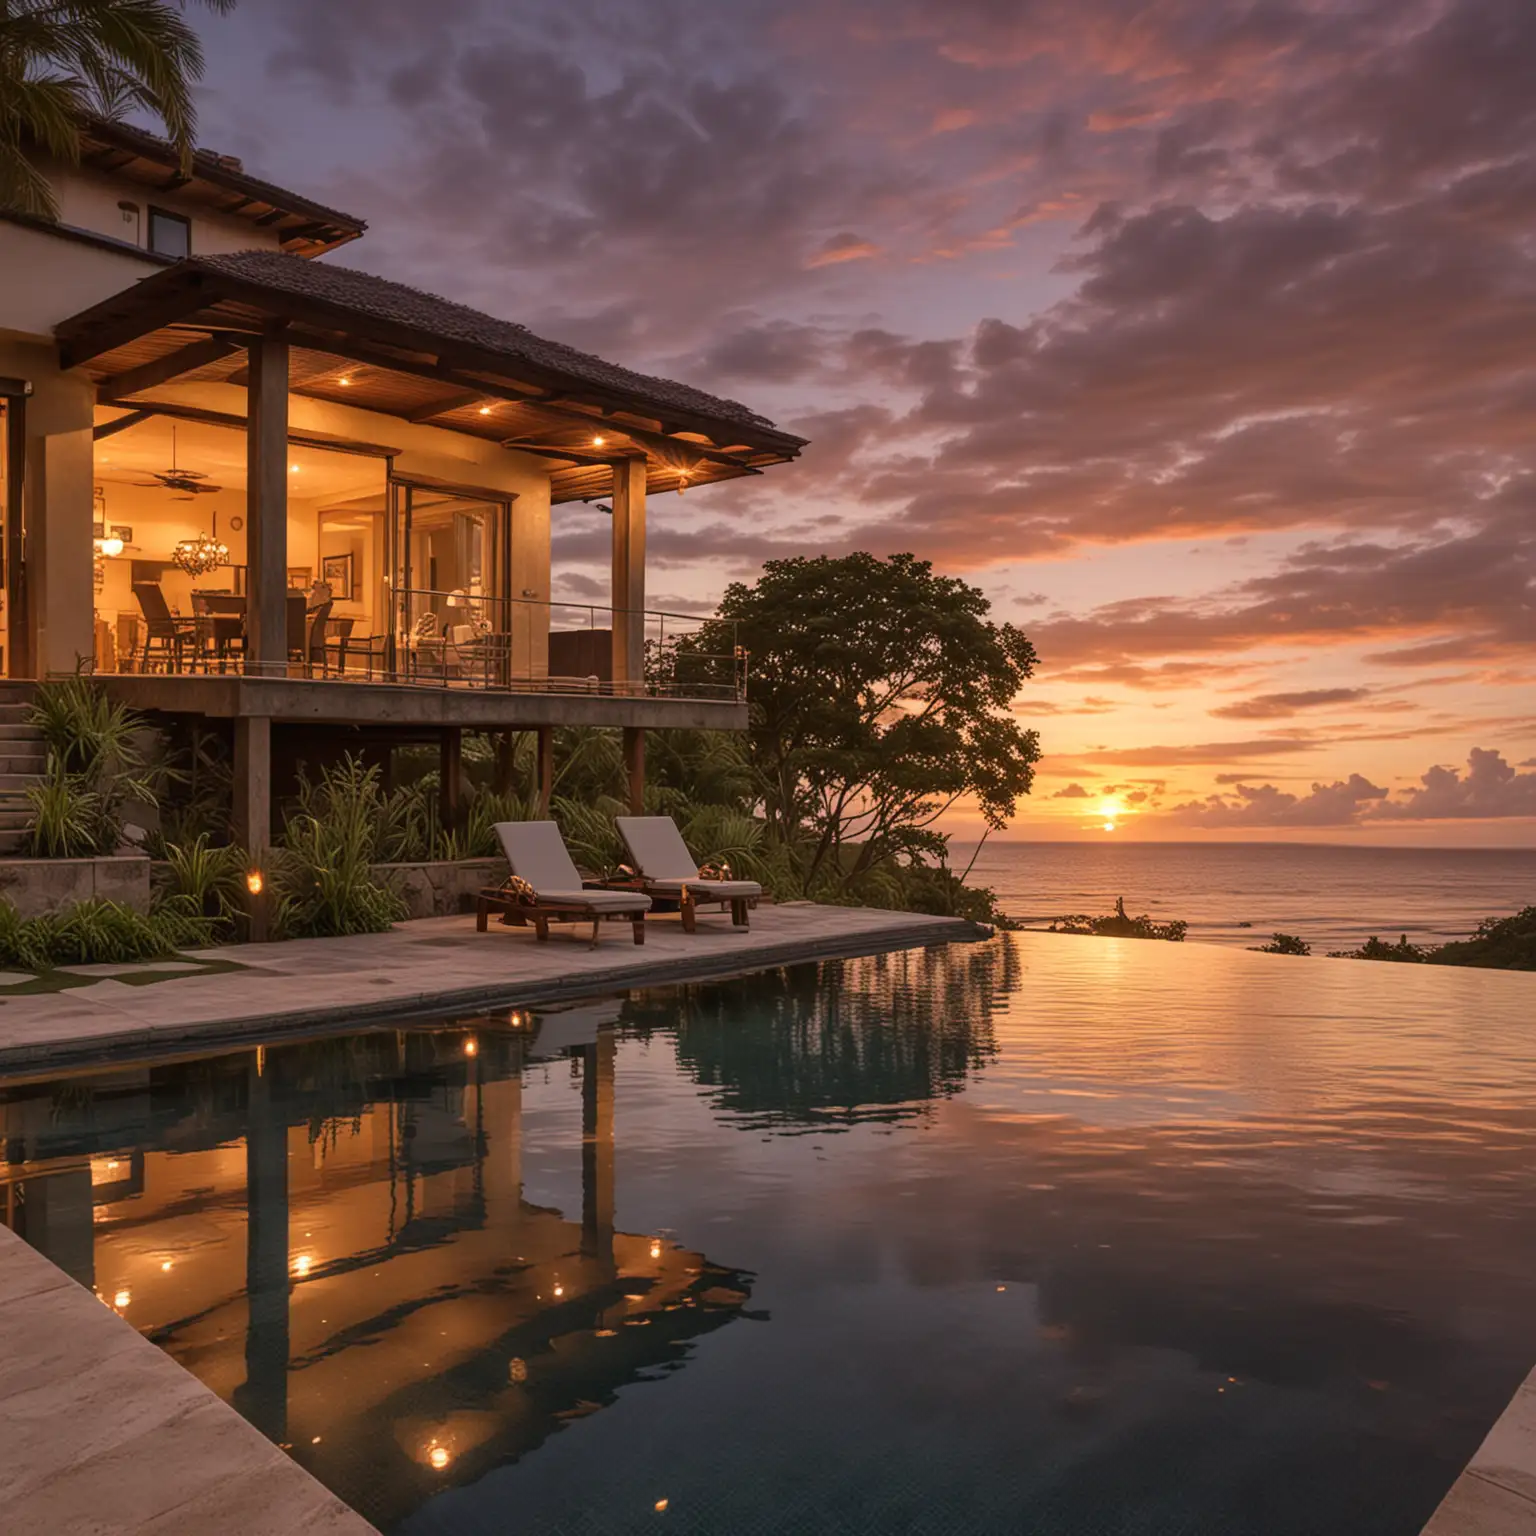 Luxurious Oceanfront Property with Infinity Pool at Sunset